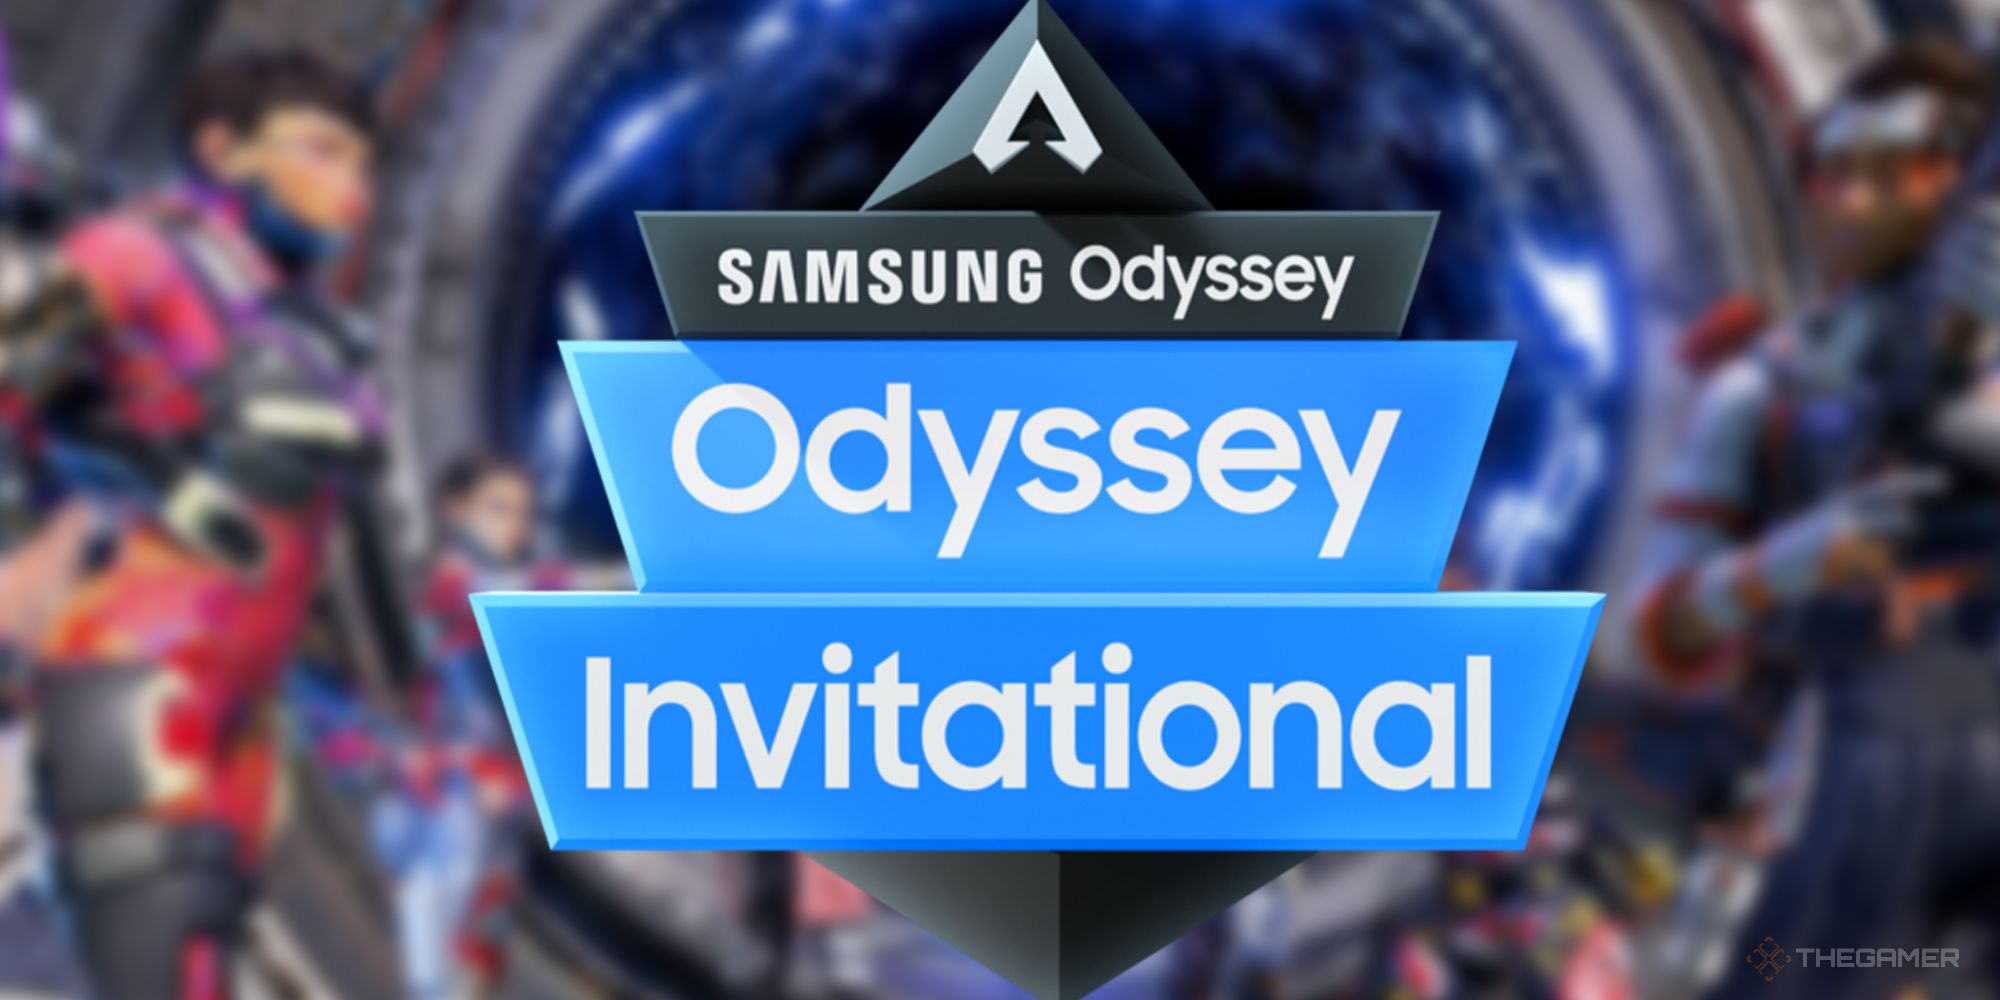 Where The Apex Legends Samsung Invitational Went Wrong